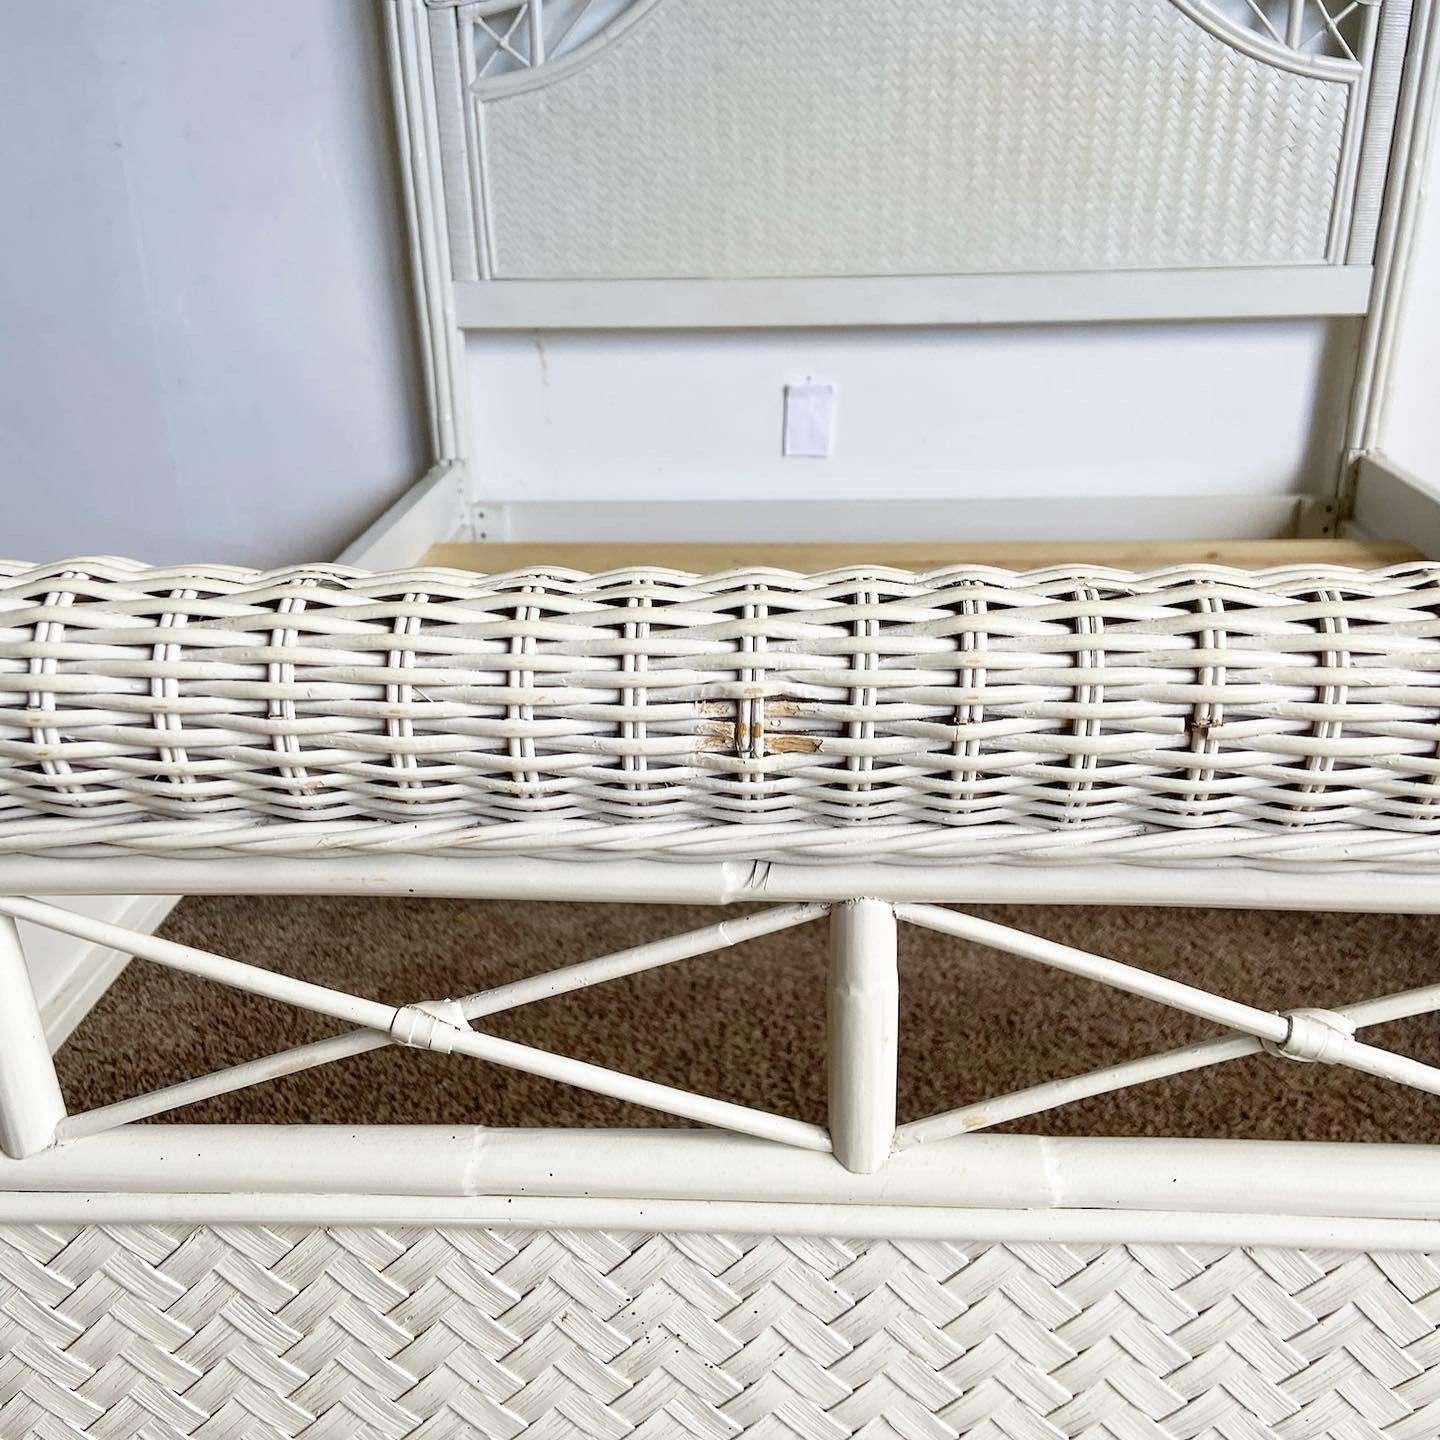 Boho Chic White Wicker Bamboo Rattan and Herringbone Queen Size Bed Frame In Good Condition For Sale In Delray Beach, FL